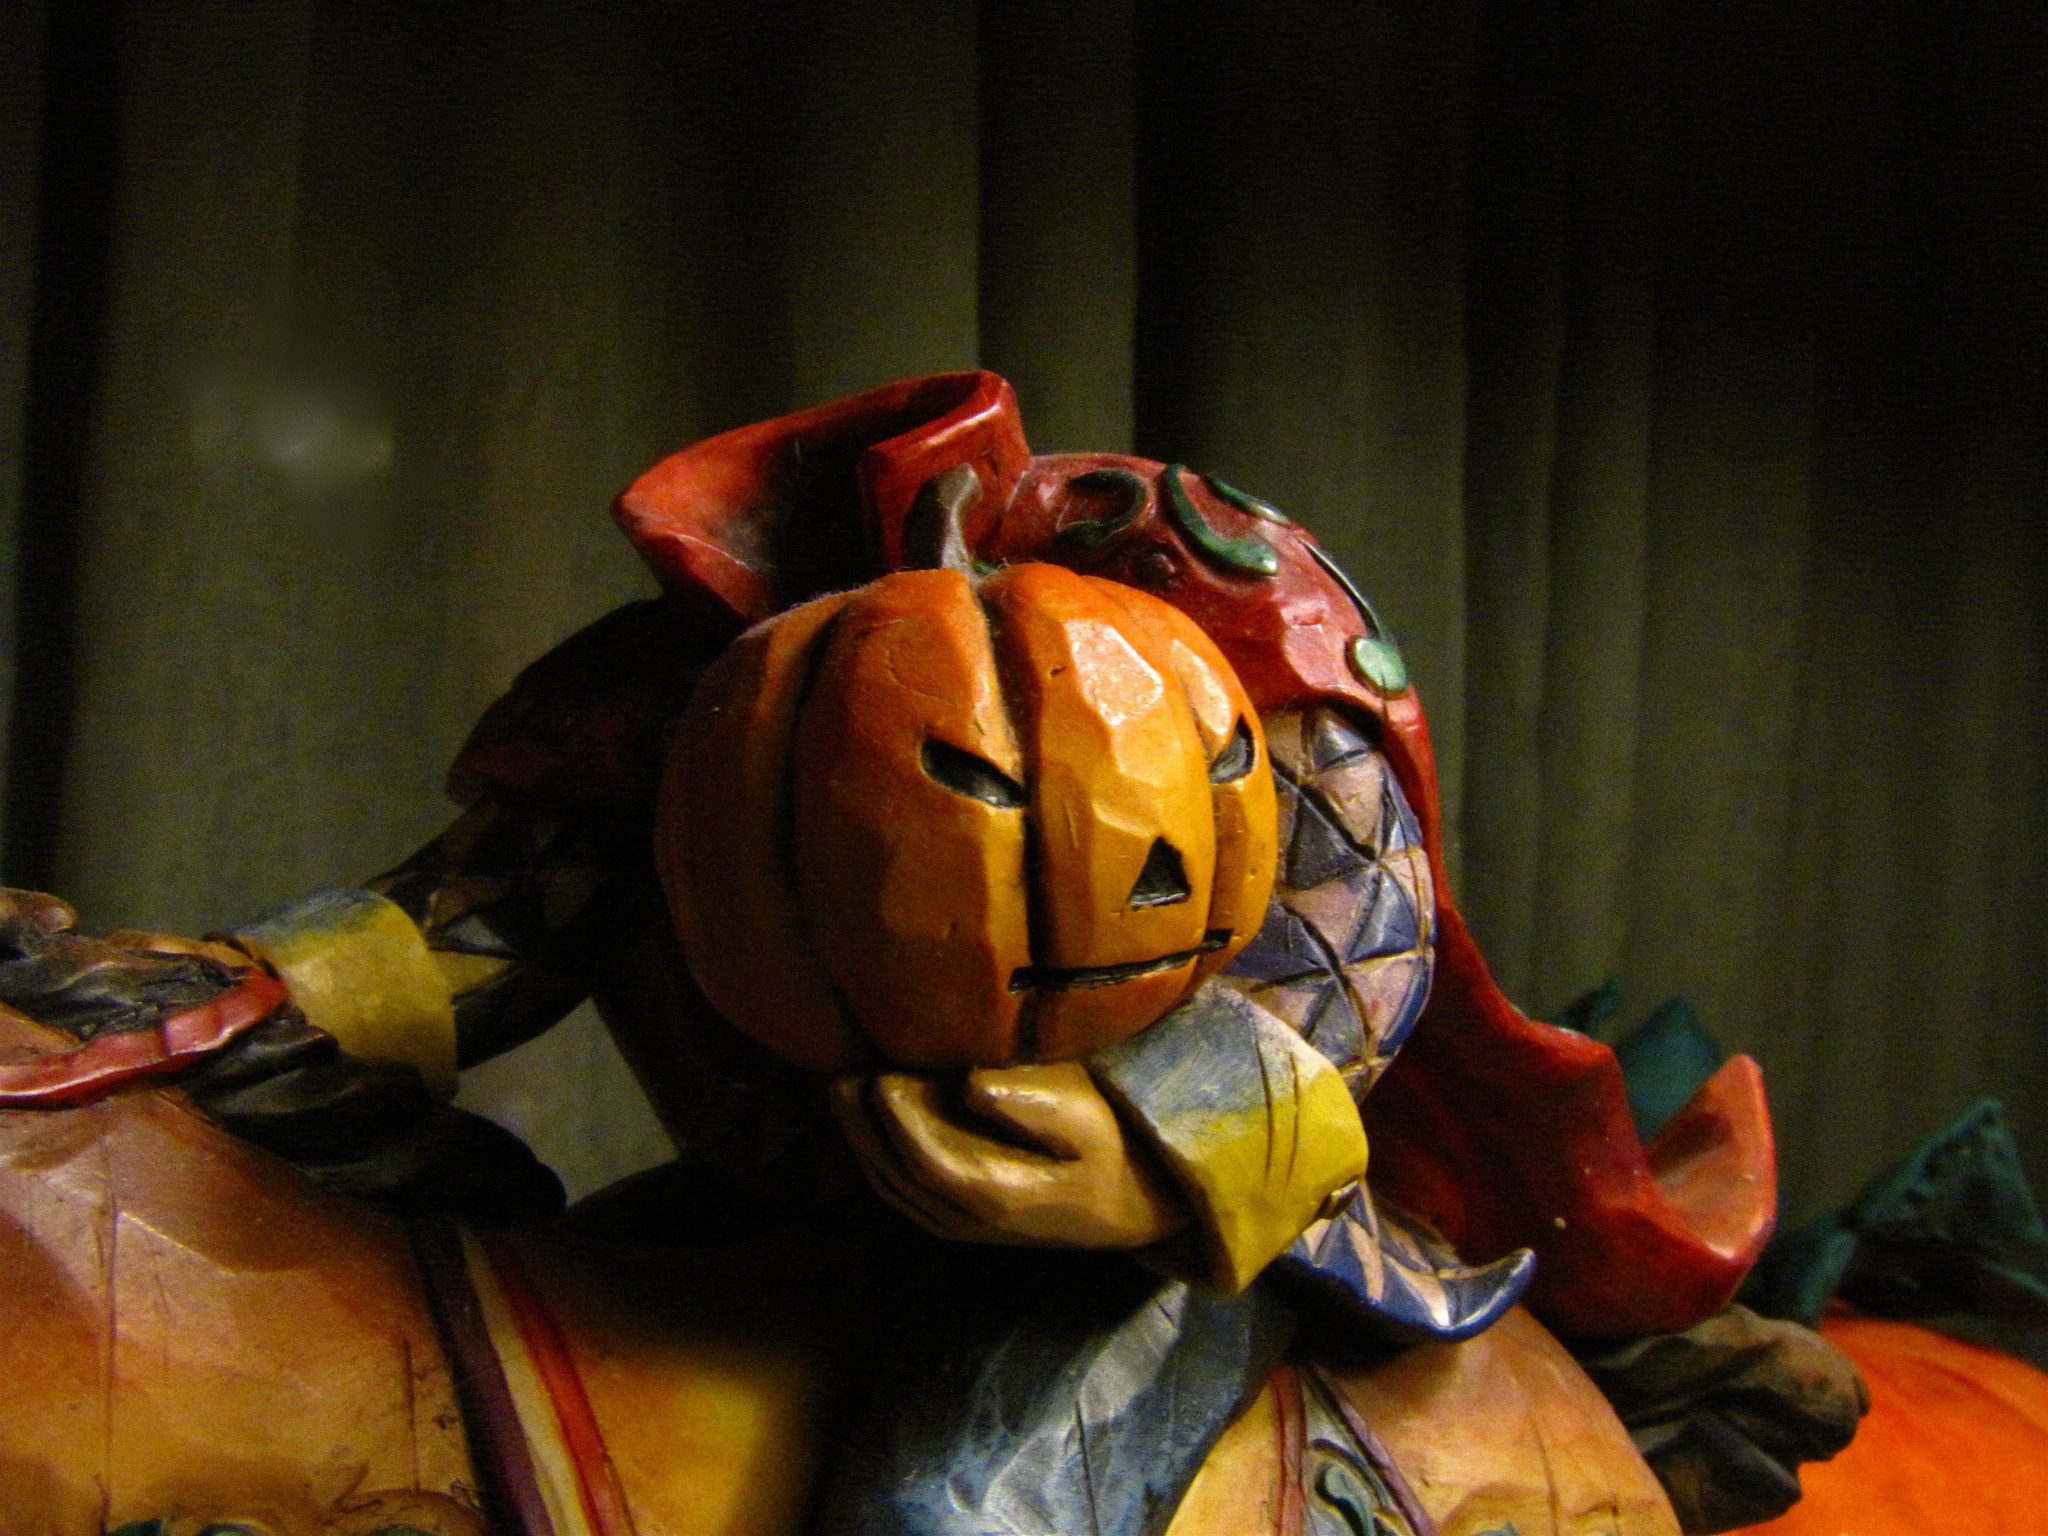 A headless horseman made of ceramic, holding a pumpkin at his side as he rides a horse